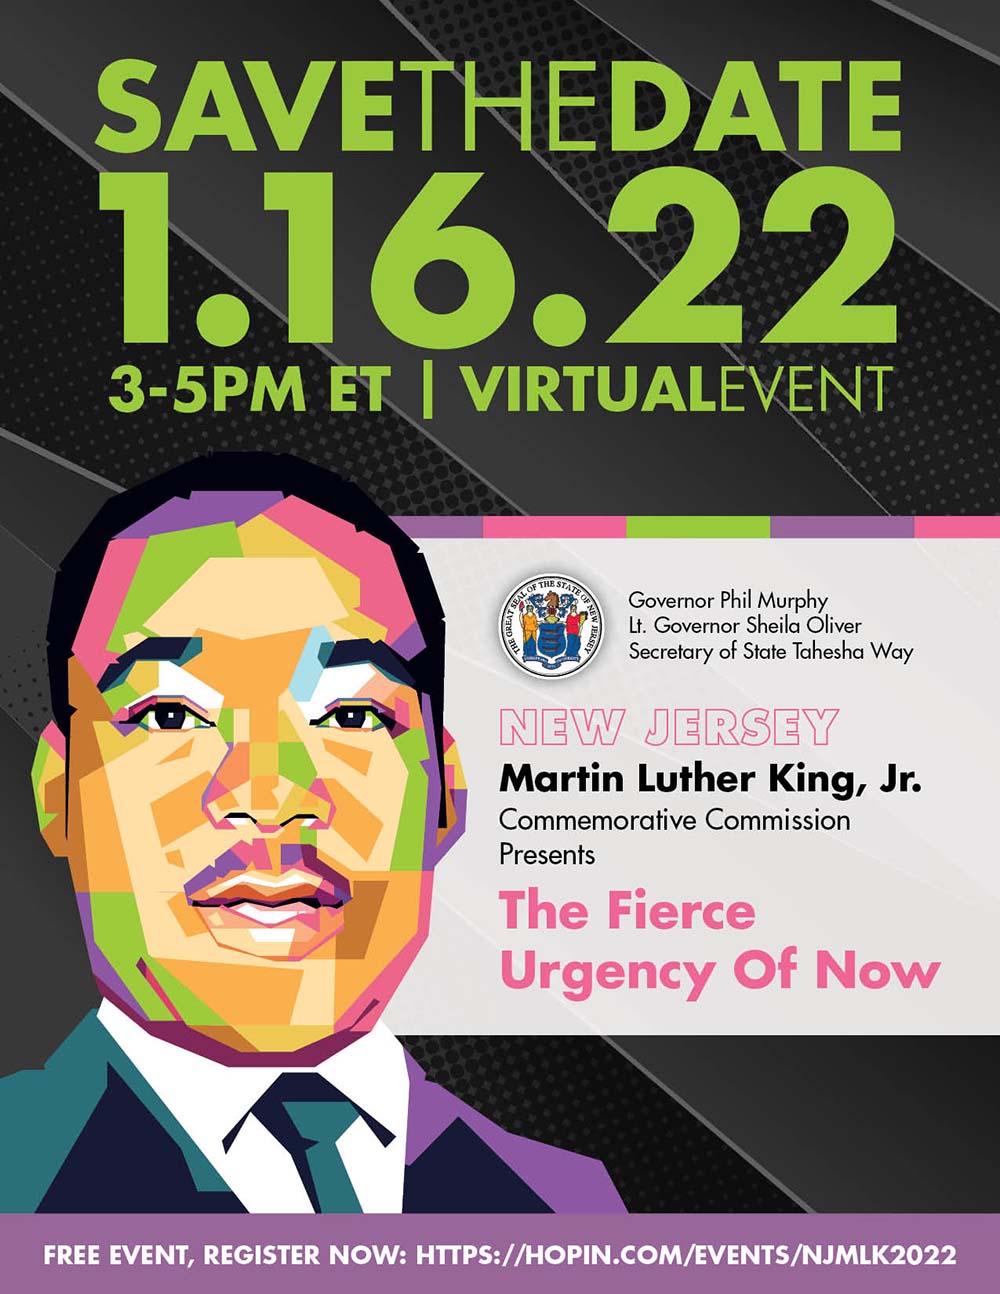 New Jersey Martin Luther King, Jr. Commemorative: The Fierce Urgency of Now